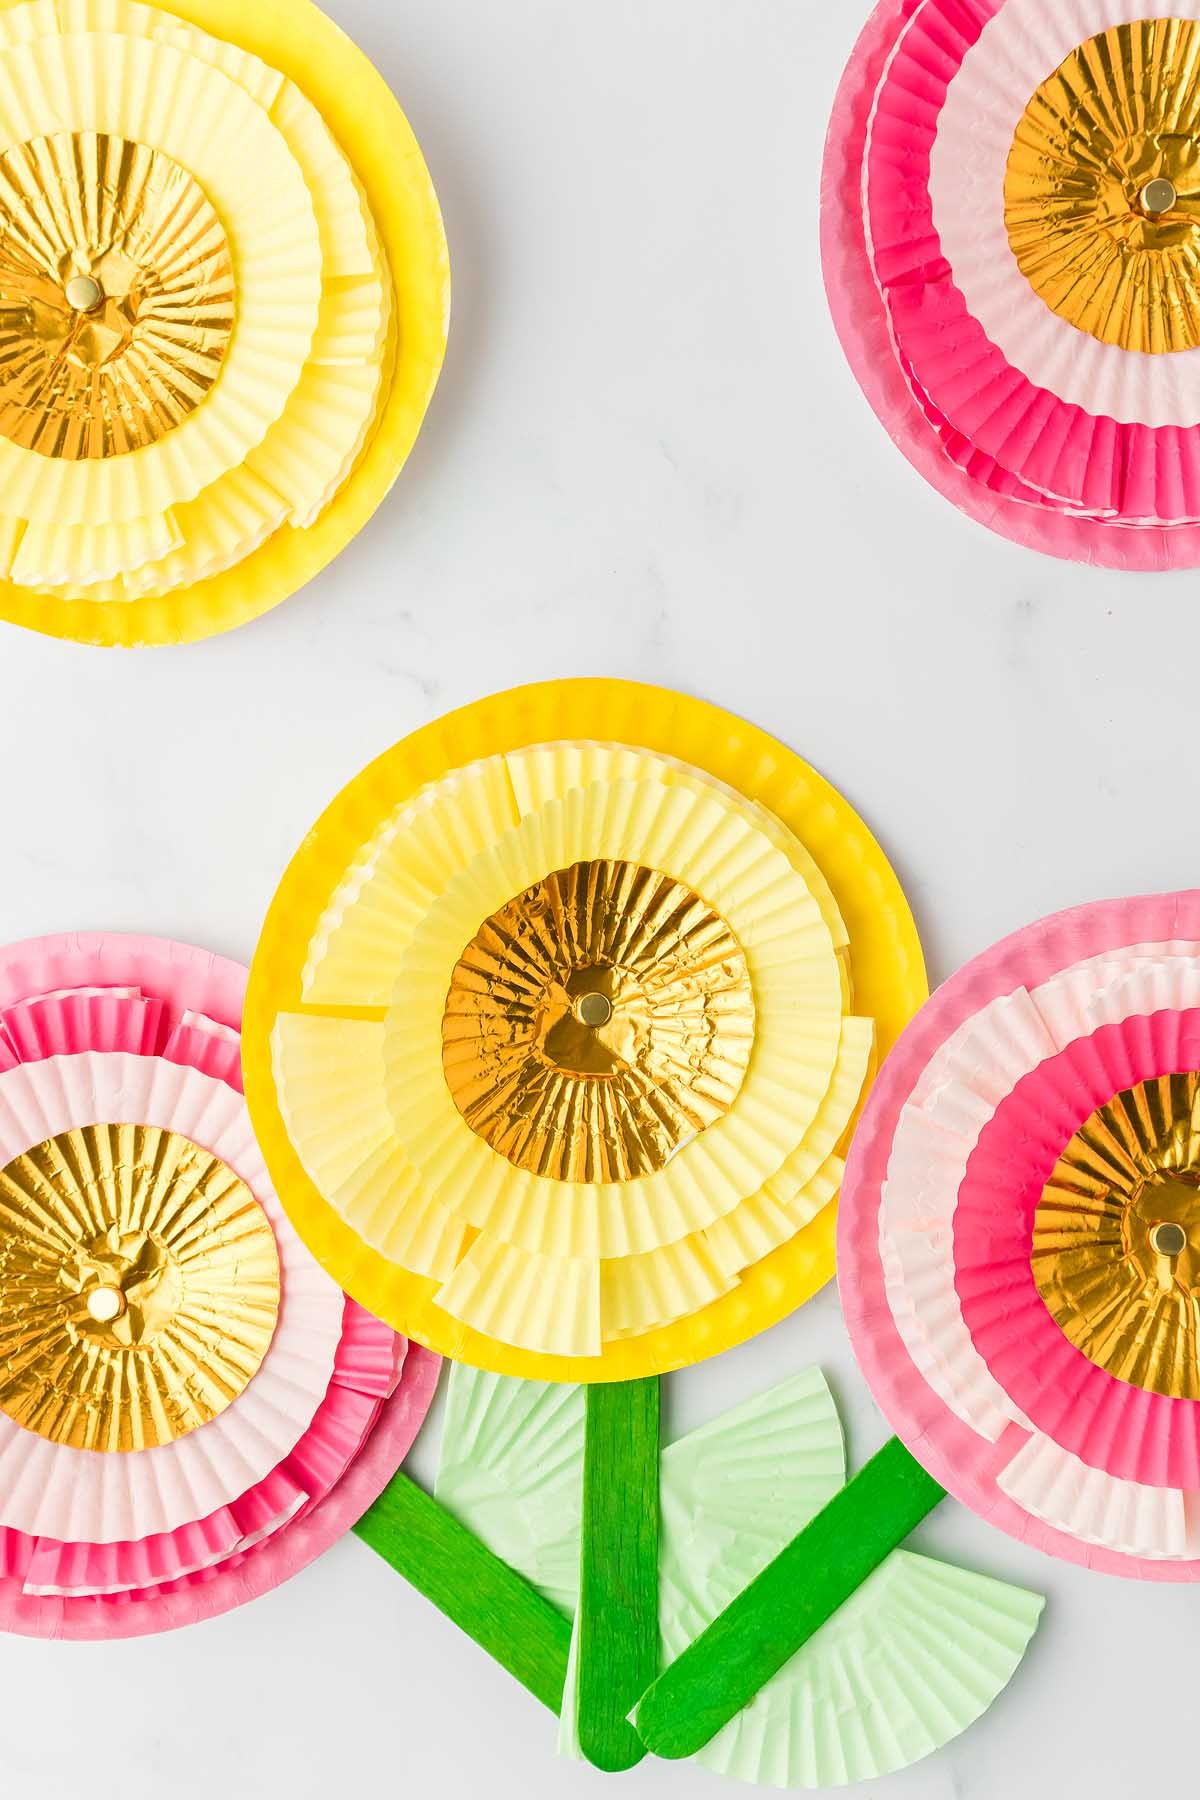 Ideas to Personalize Paper Plate Flower Craft